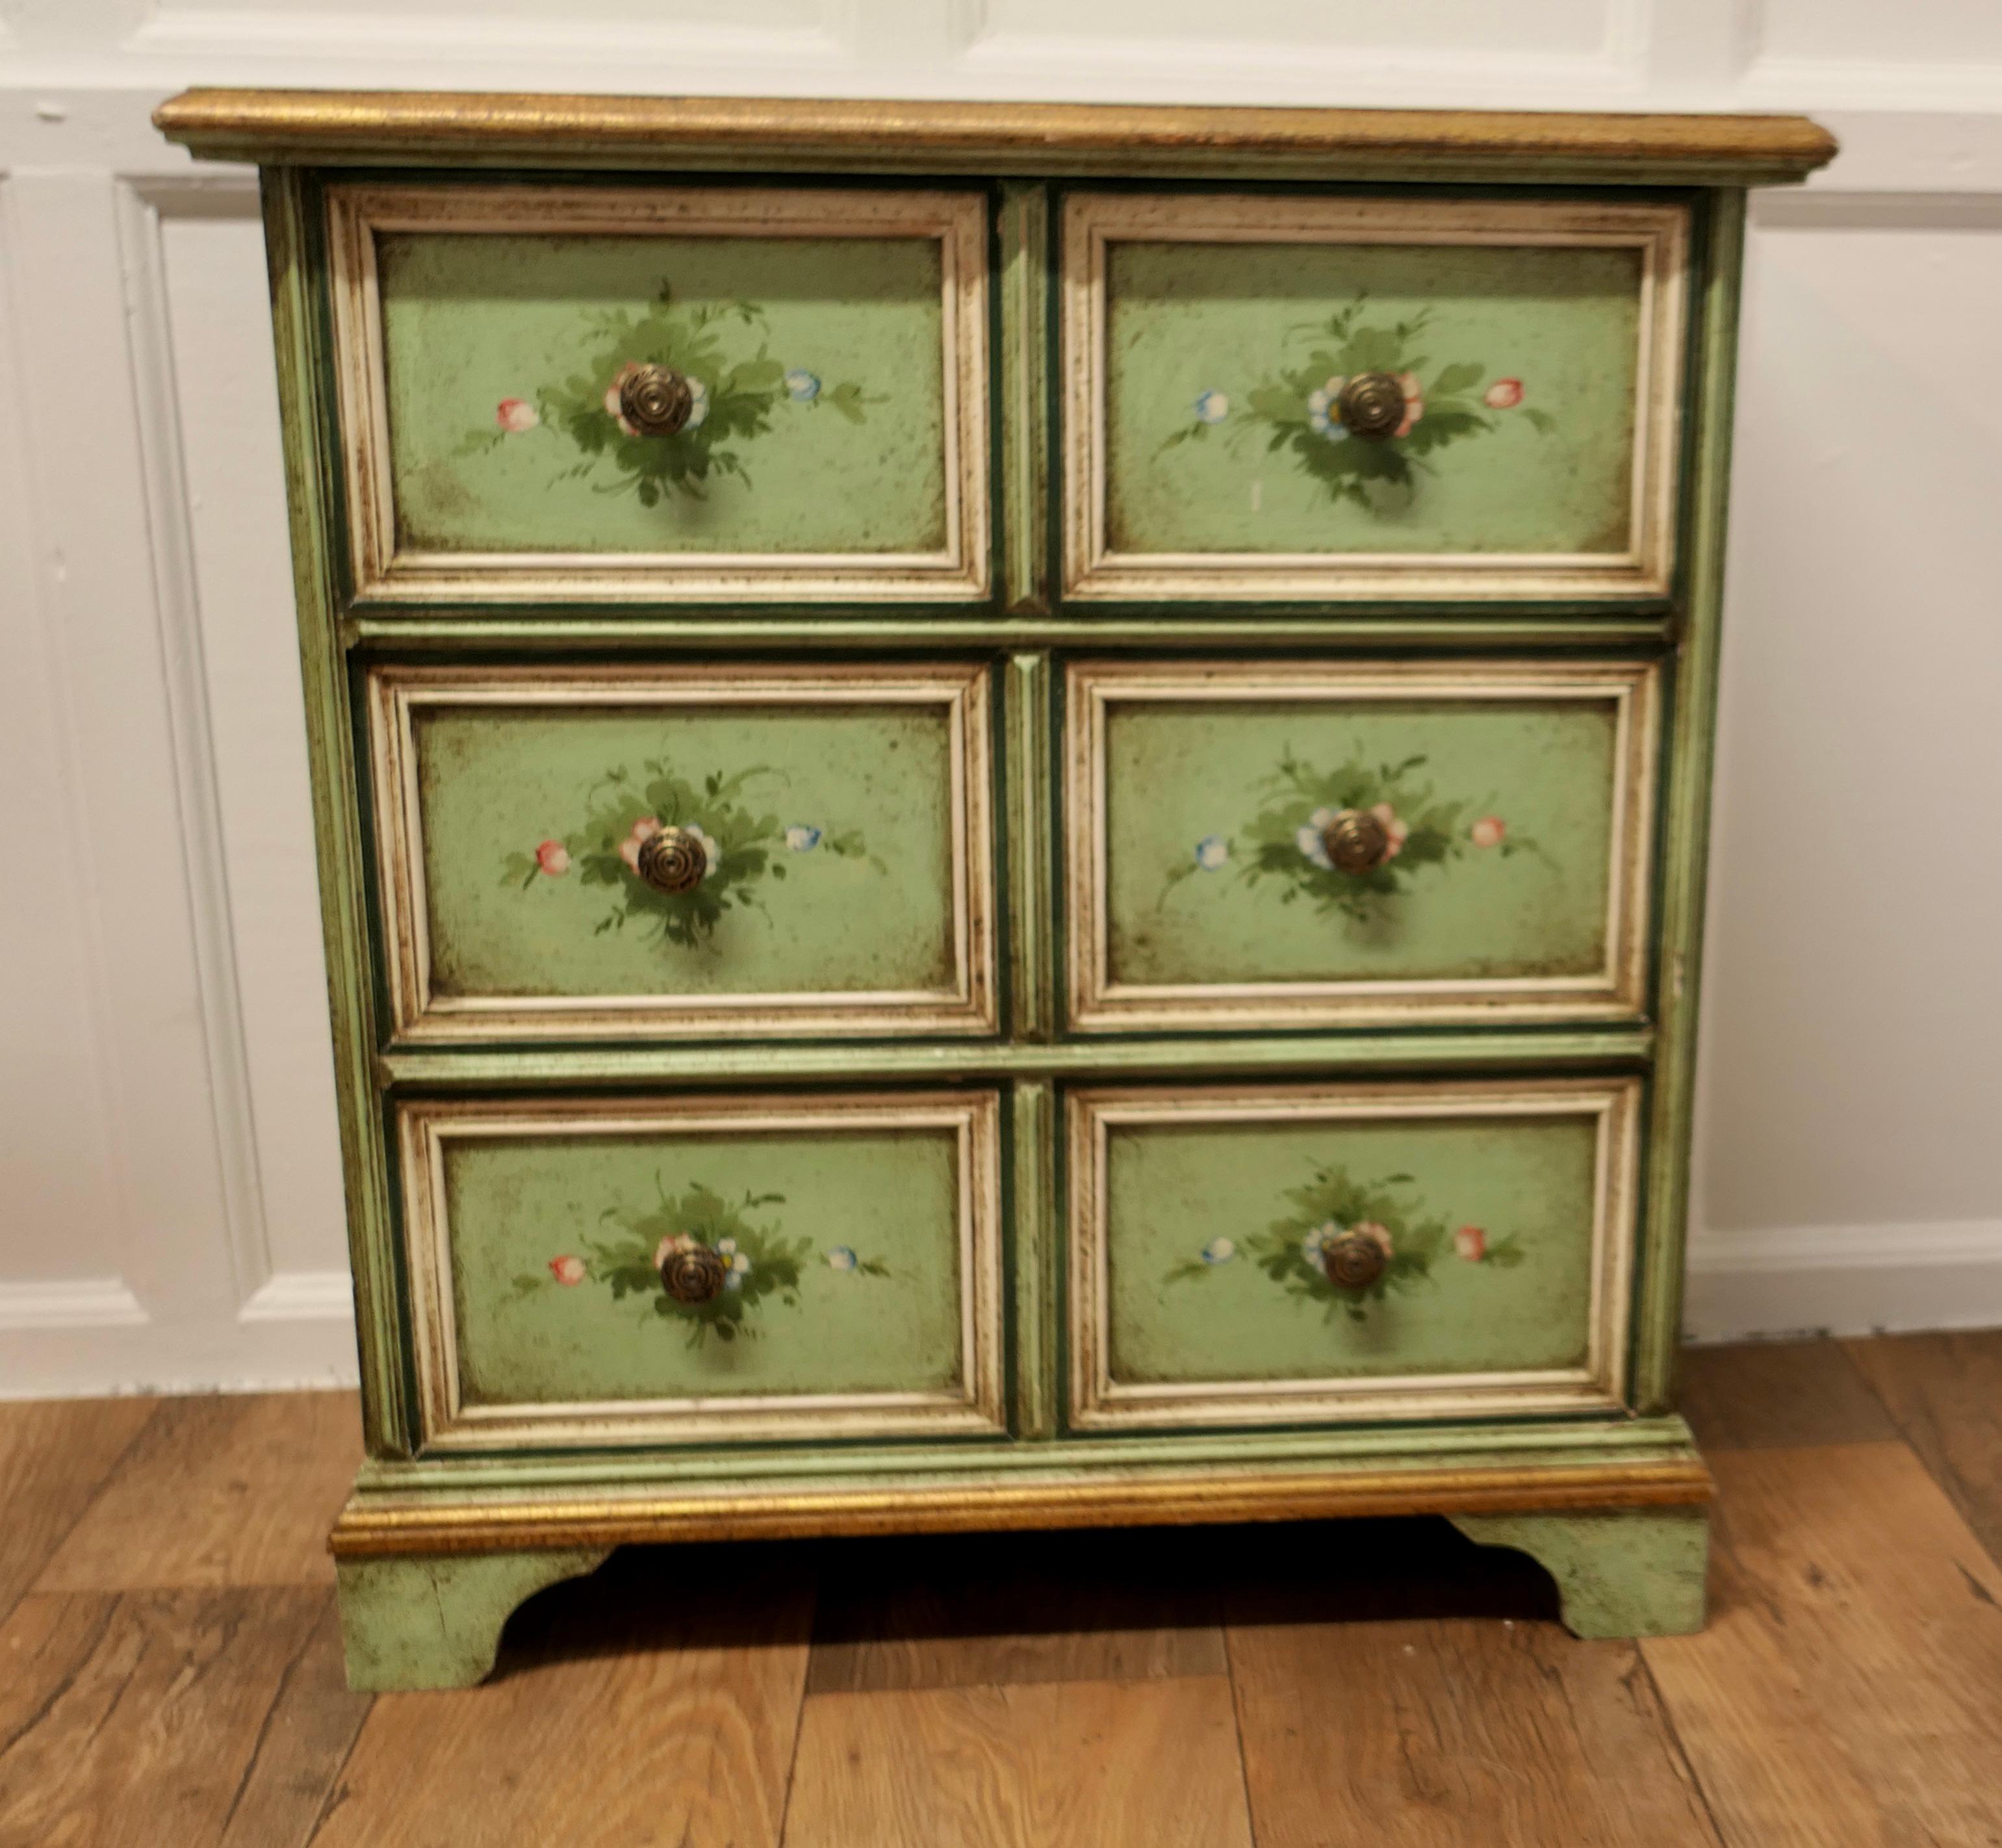 Original Shabby Painted Chest of Drawers

This delightful 3 Drawer Chest of drawers is in its original painted finish which is in used but still very attractive condition 
This is a good quality piece, it has a shaped moulded edge in gold to the